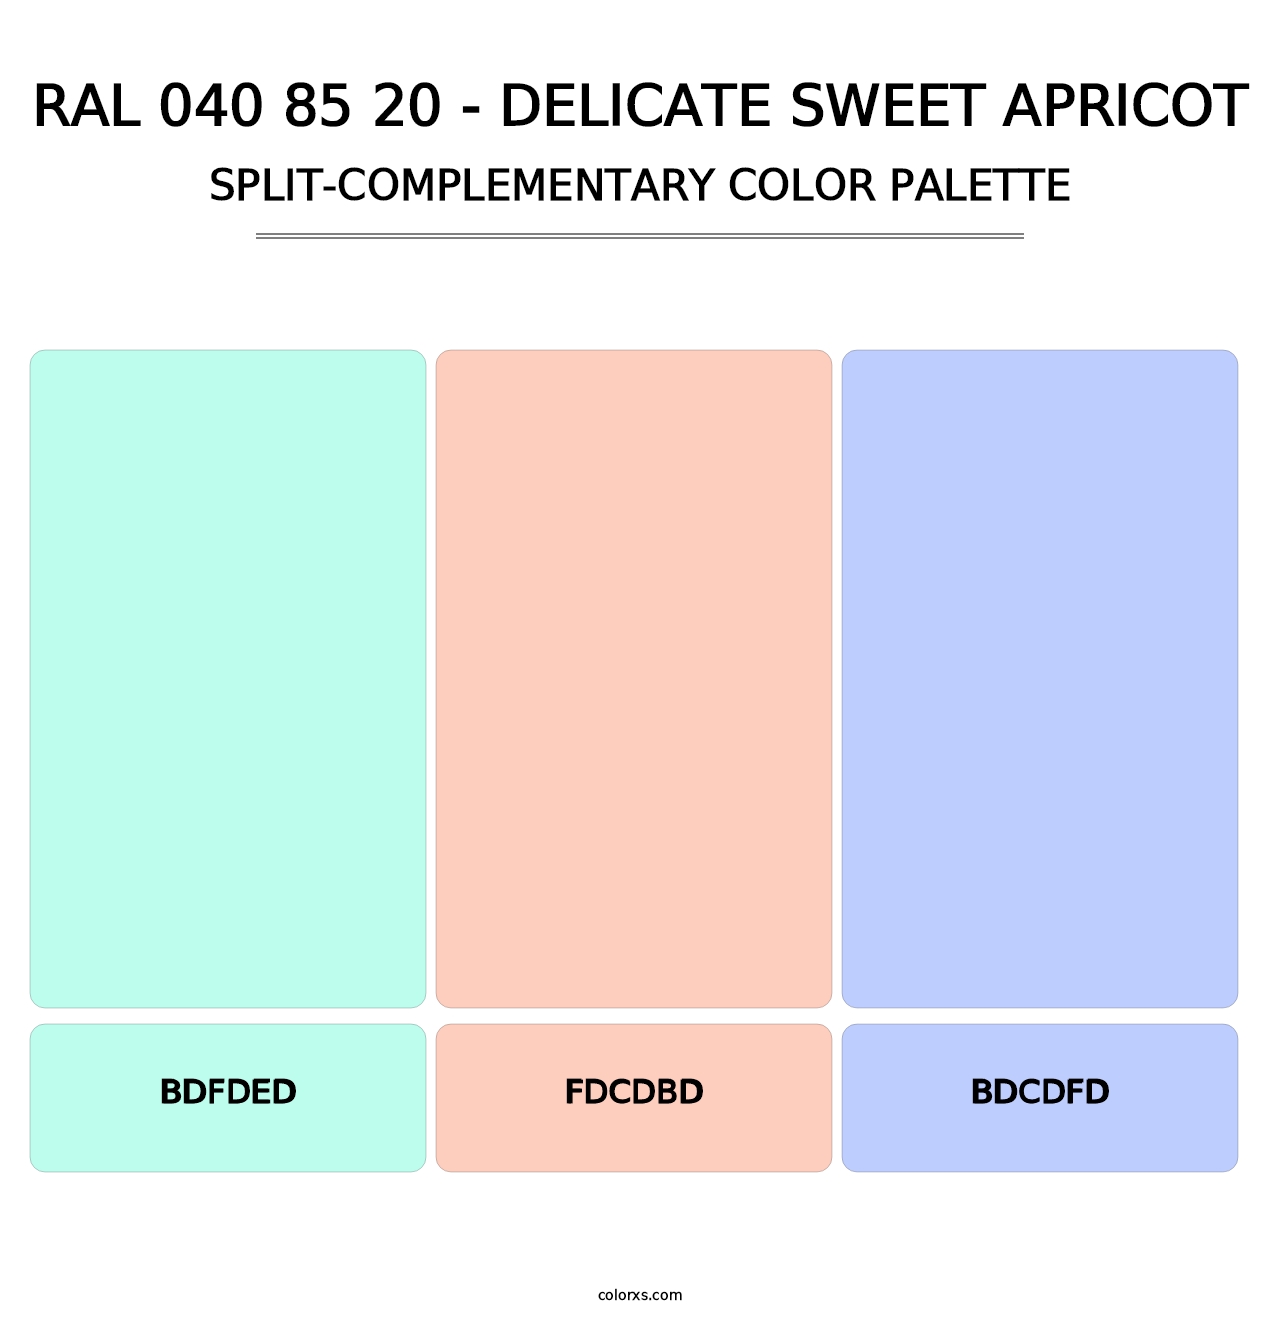 RAL 040 85 20 - Delicate Sweet Apricot - Split-Complementary Color Palette